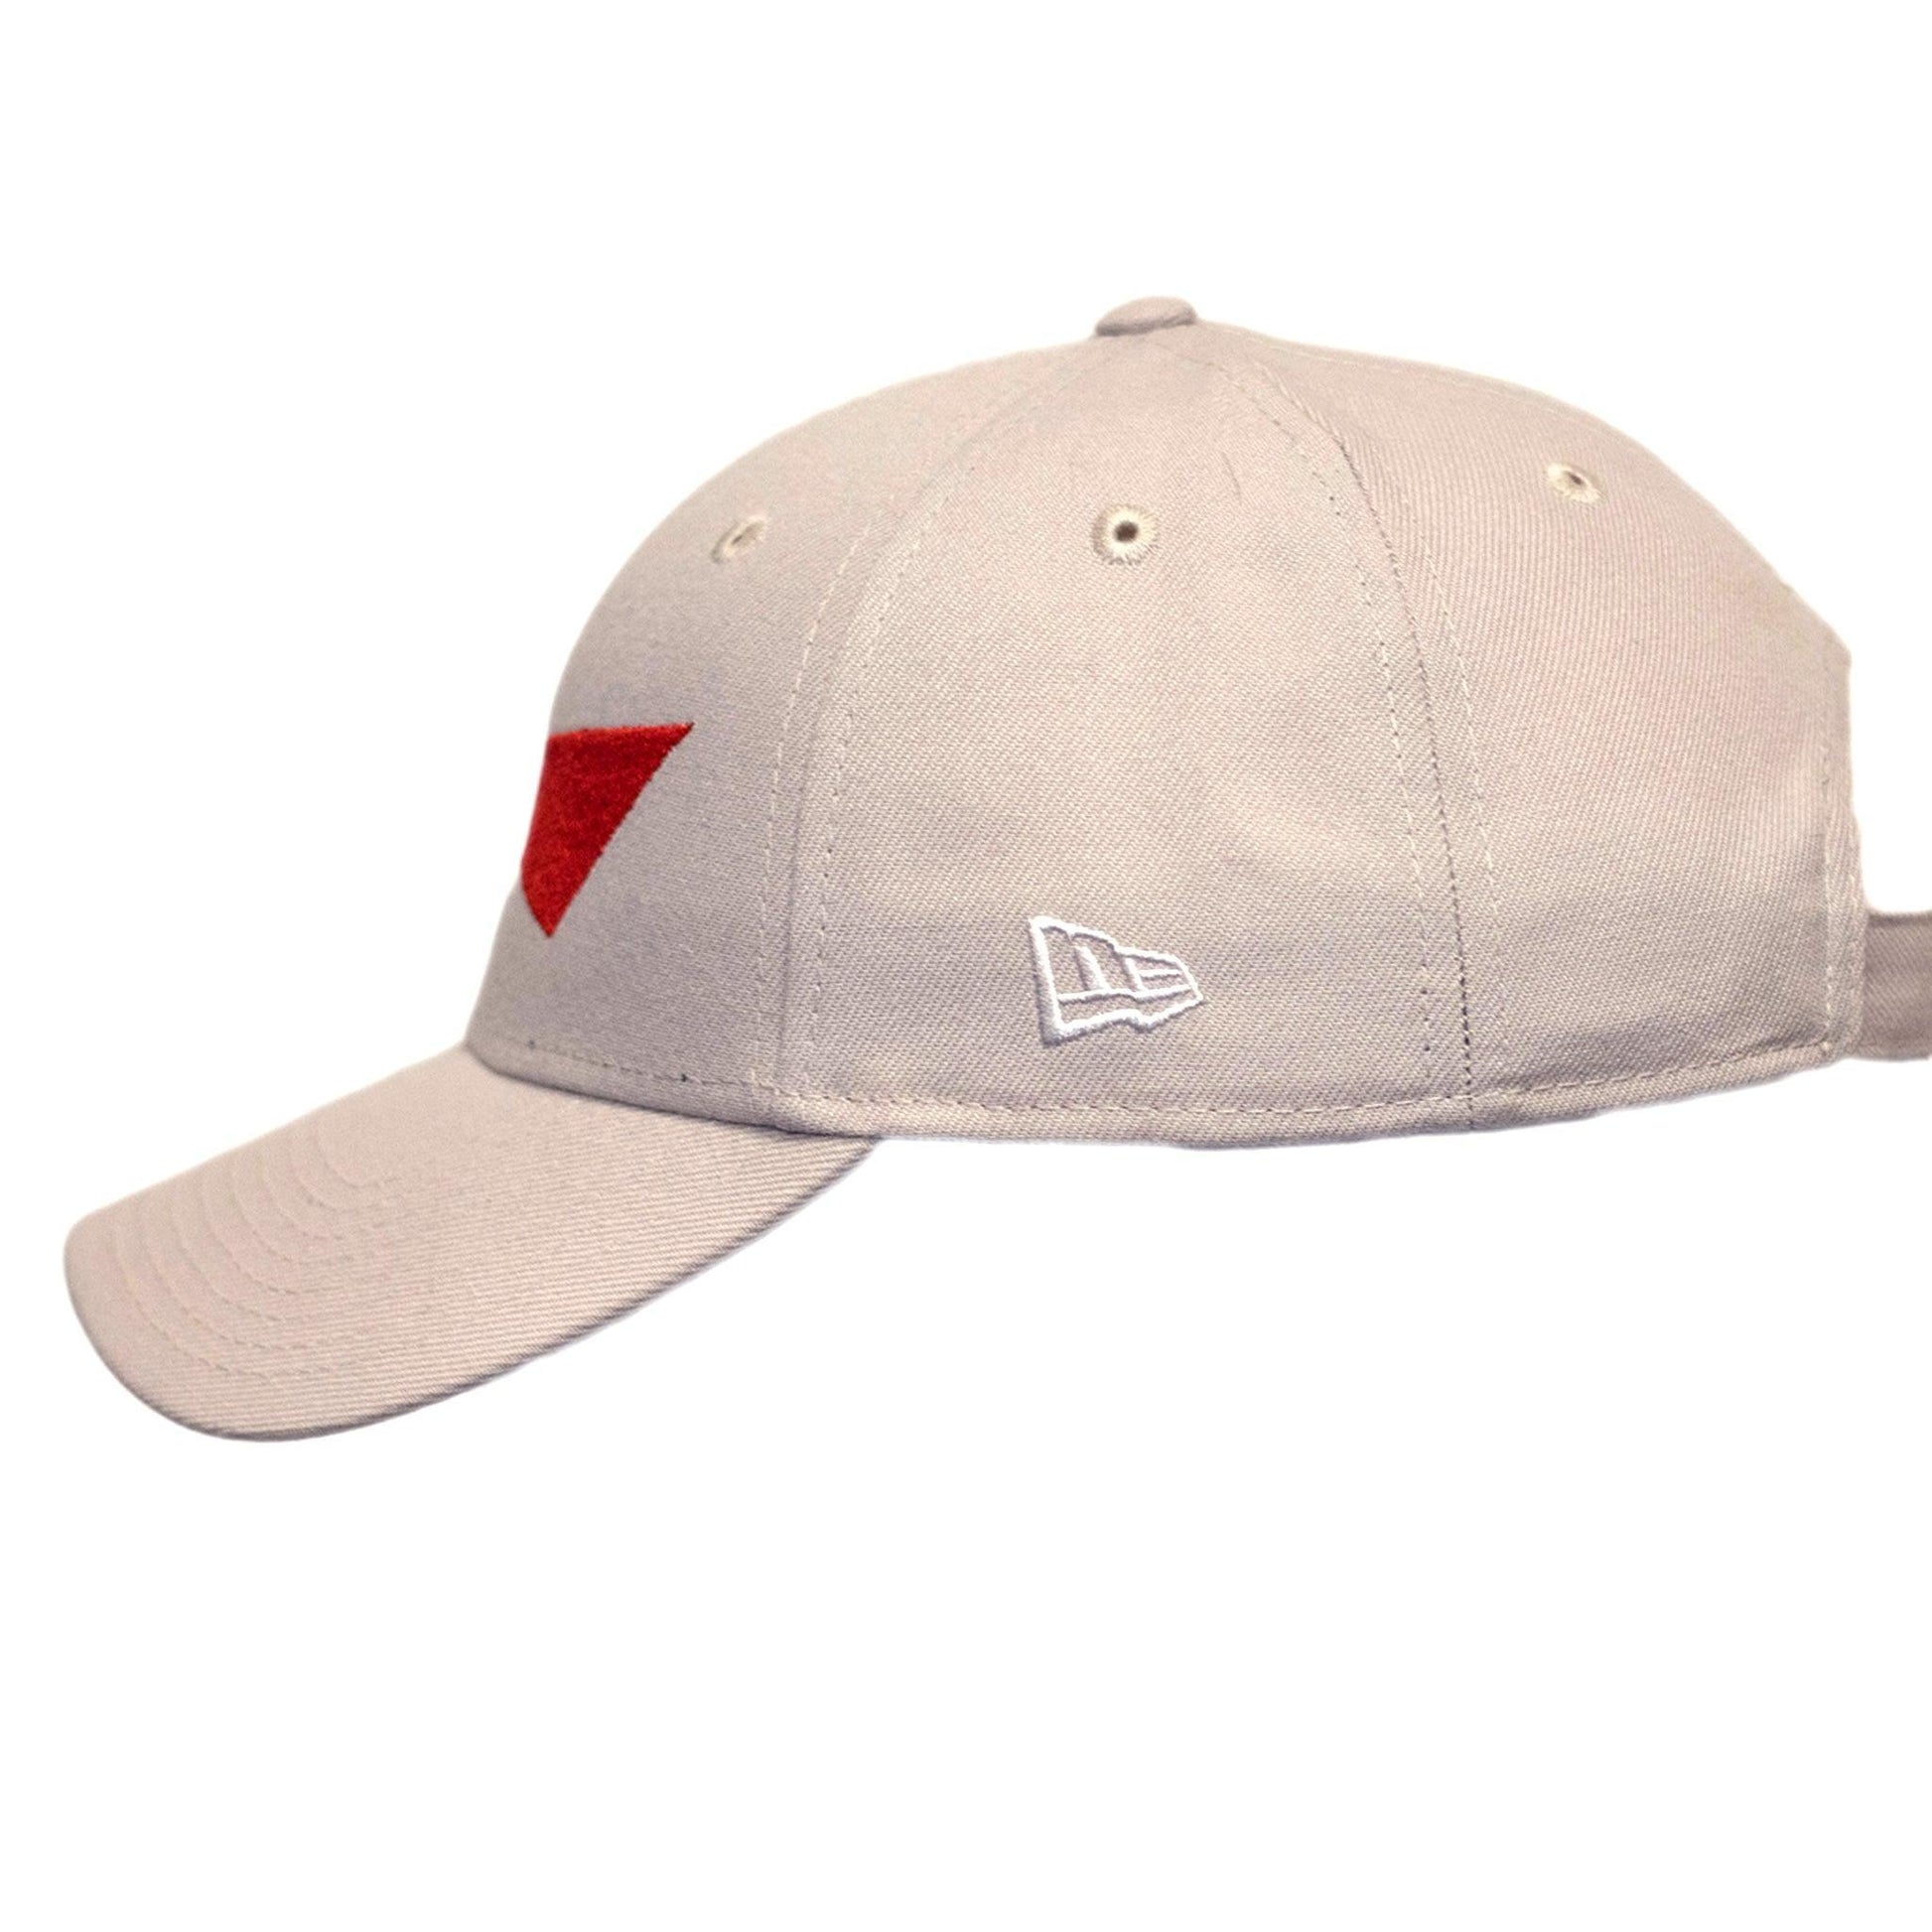 Left side view of embroidered New era logo in white